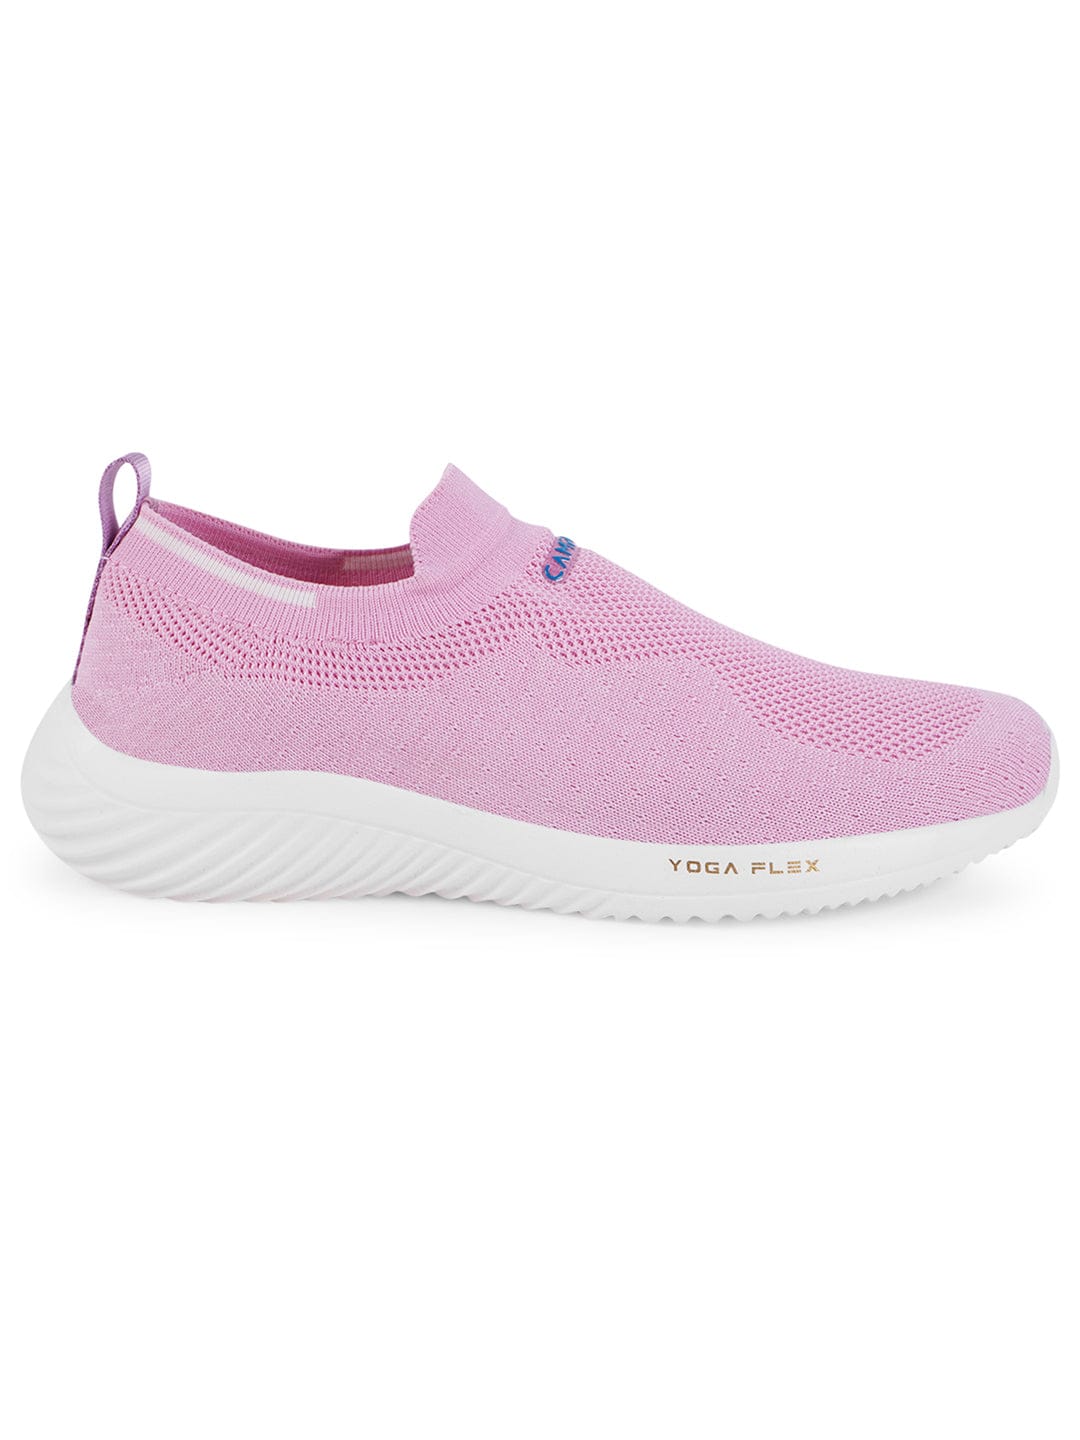 Buy Casual Shoes For Women: Camp-Callie-Bby-Pnk-Of-Wht | Campus Shoes